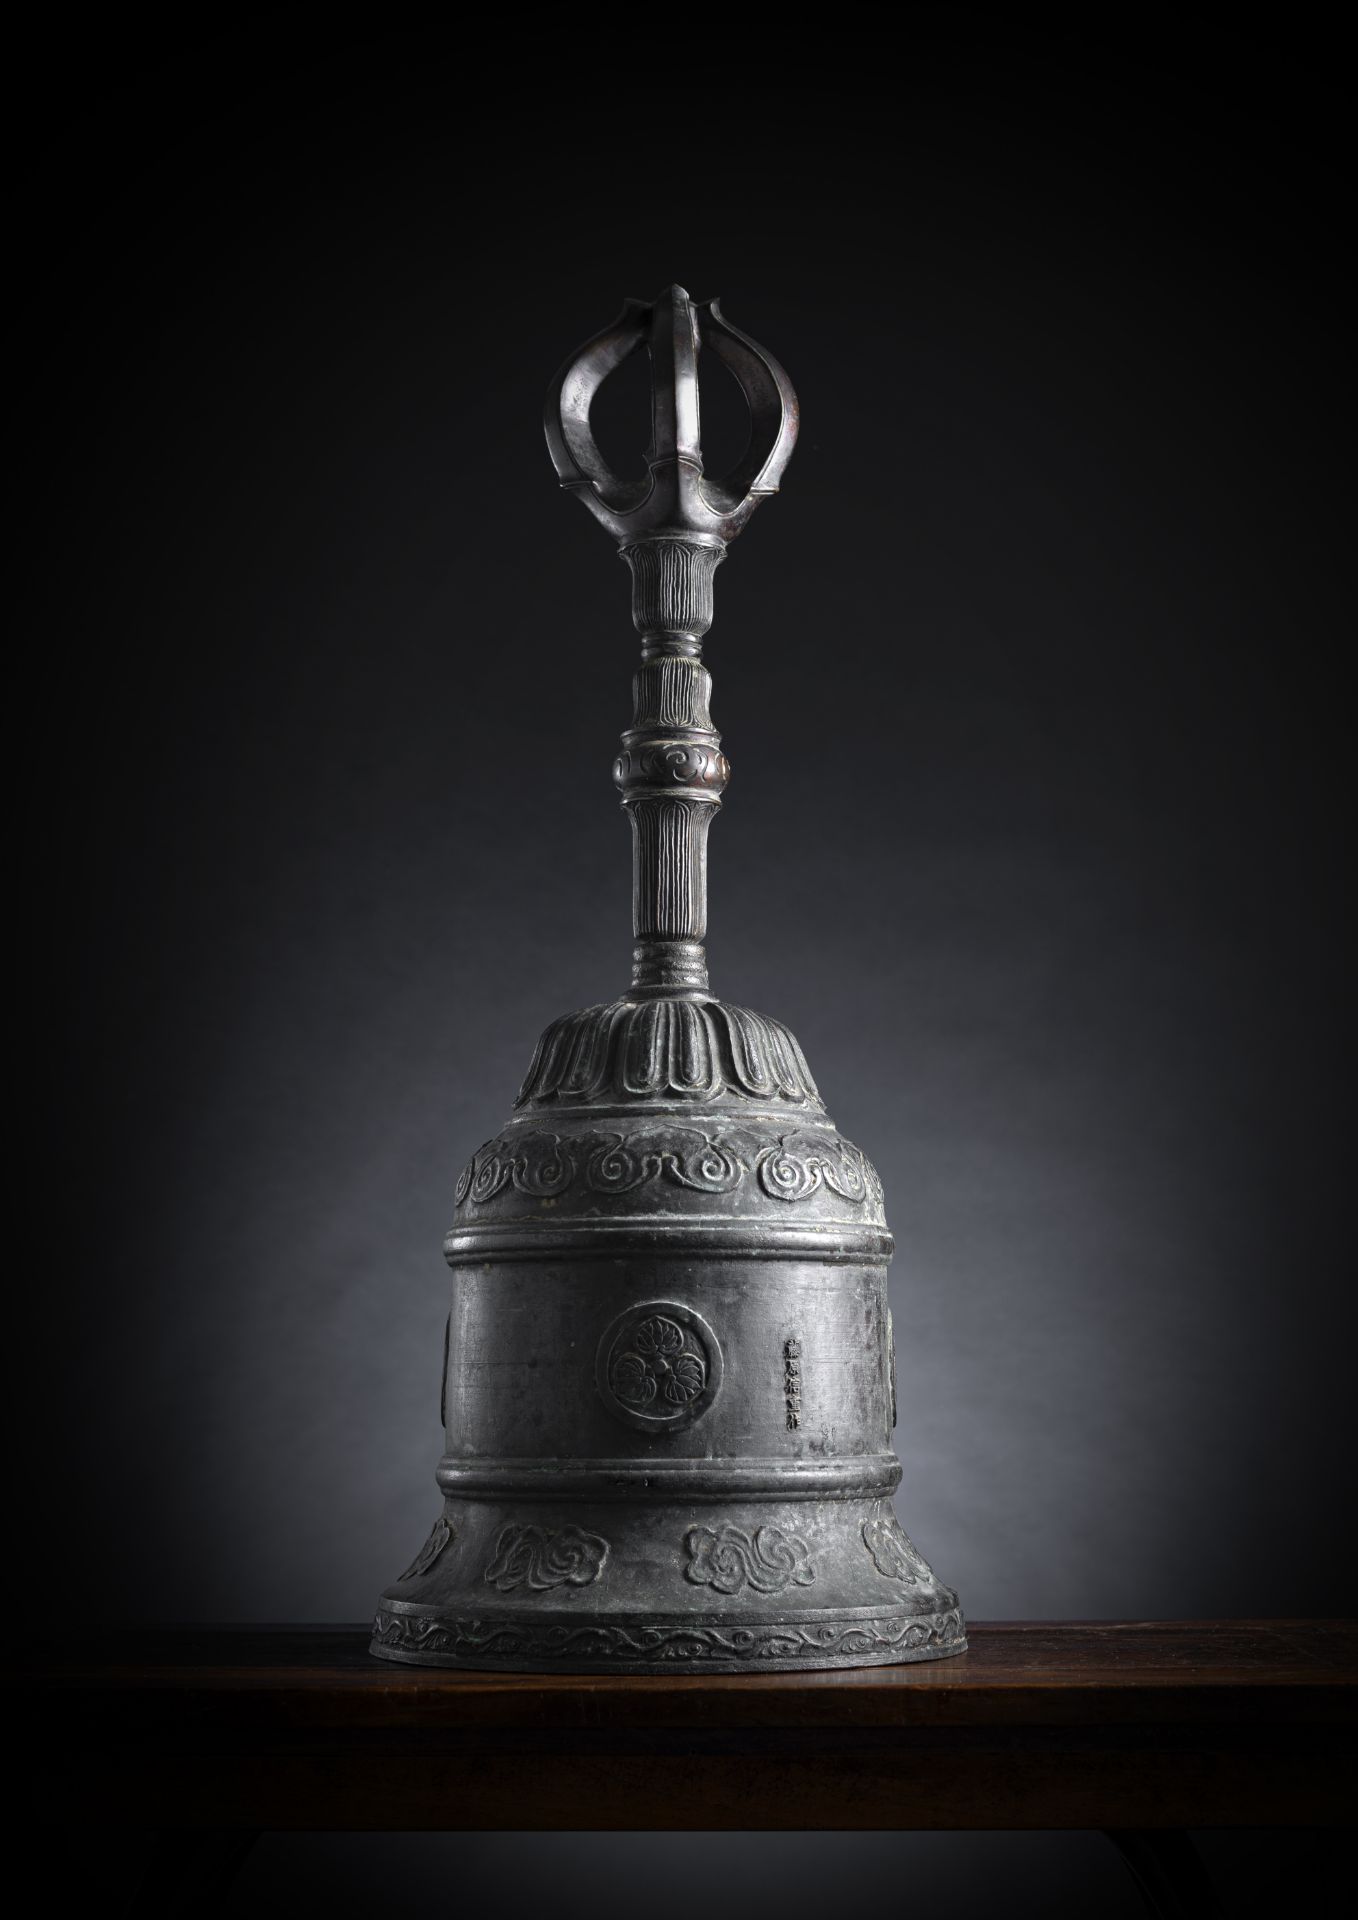 A VERY LARGE INSCRIBED BRONZE TEMPLE BELL - Image 2 of 4